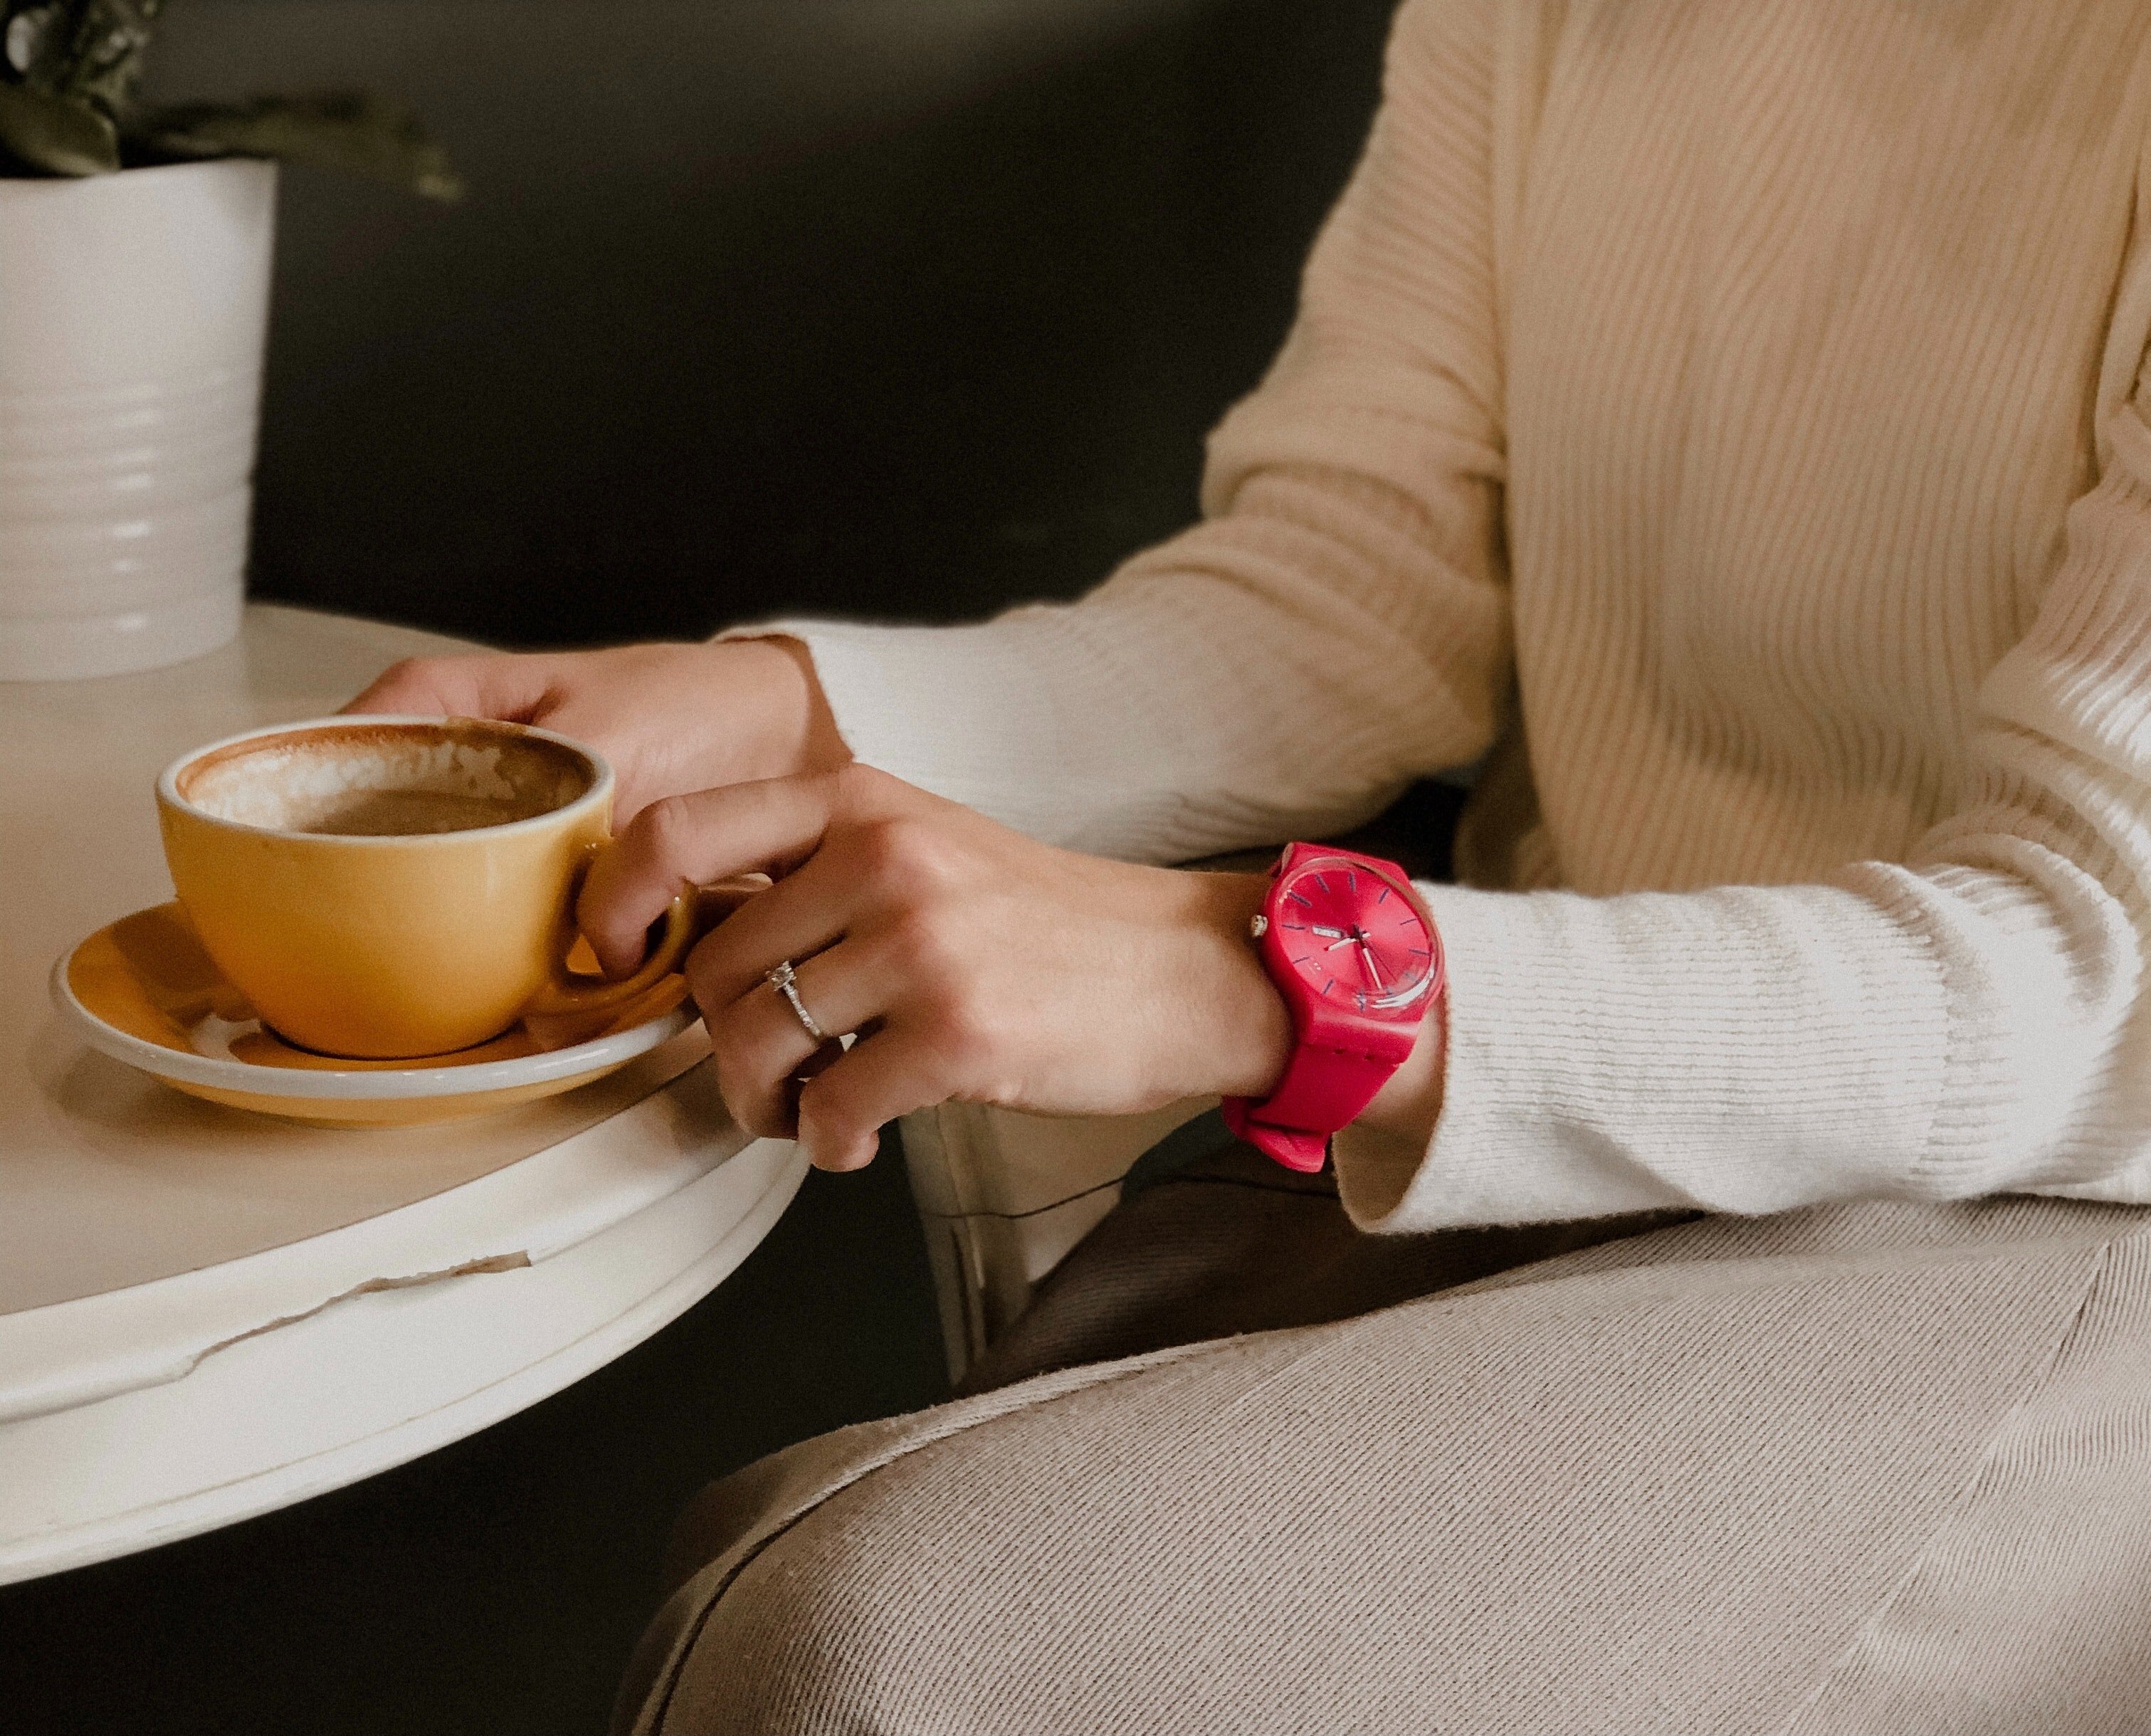 Lorraine was cursing her horrible fate as she sat depressed at the cafe. | Source: Pexels